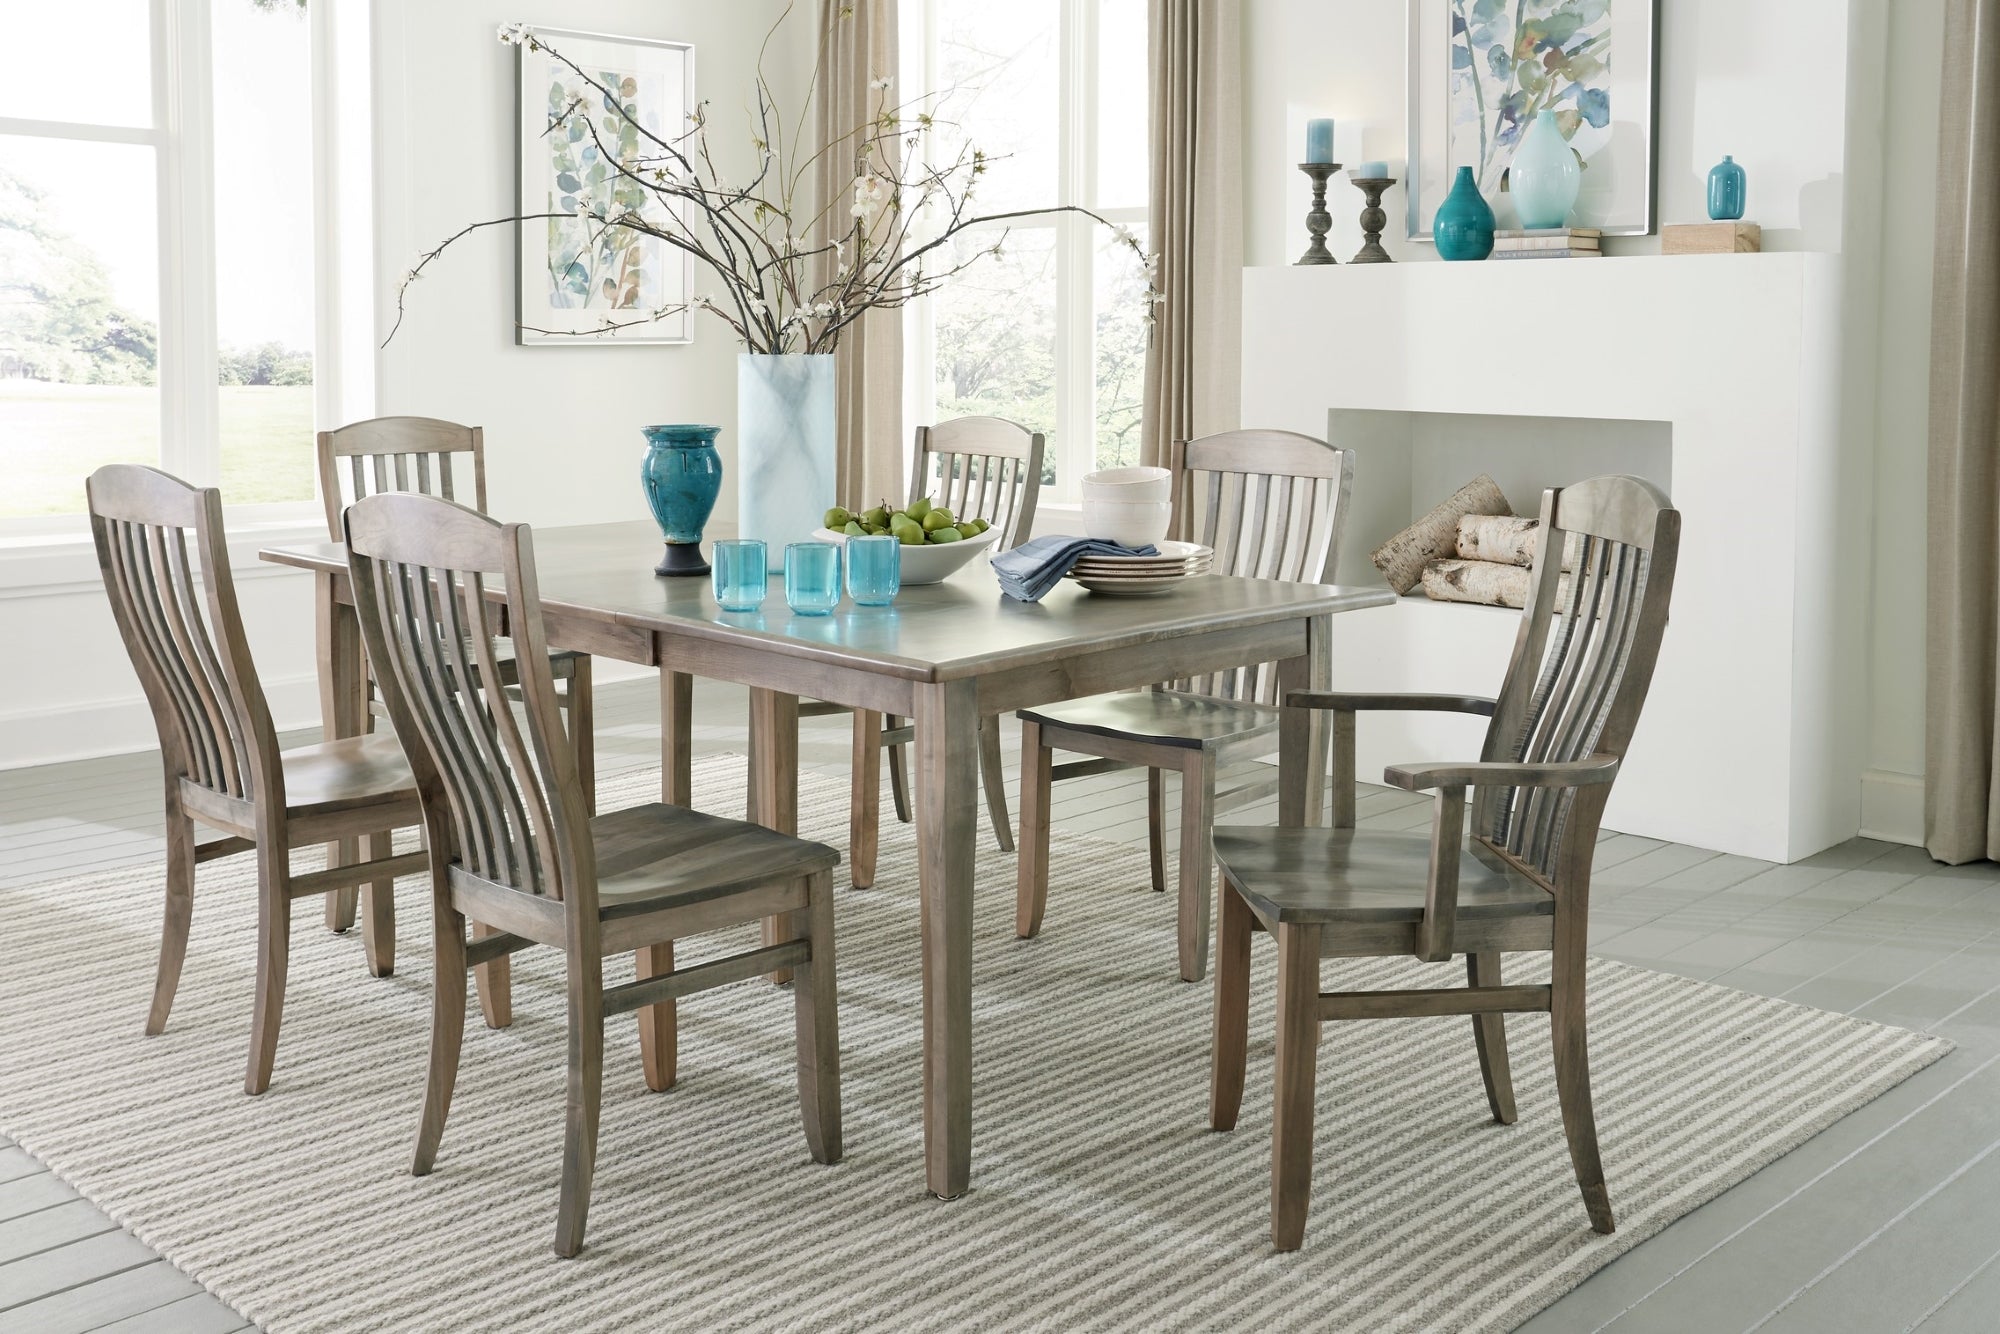 grey finished wood rectangle dining table surrounded by six matching wood dining chairs